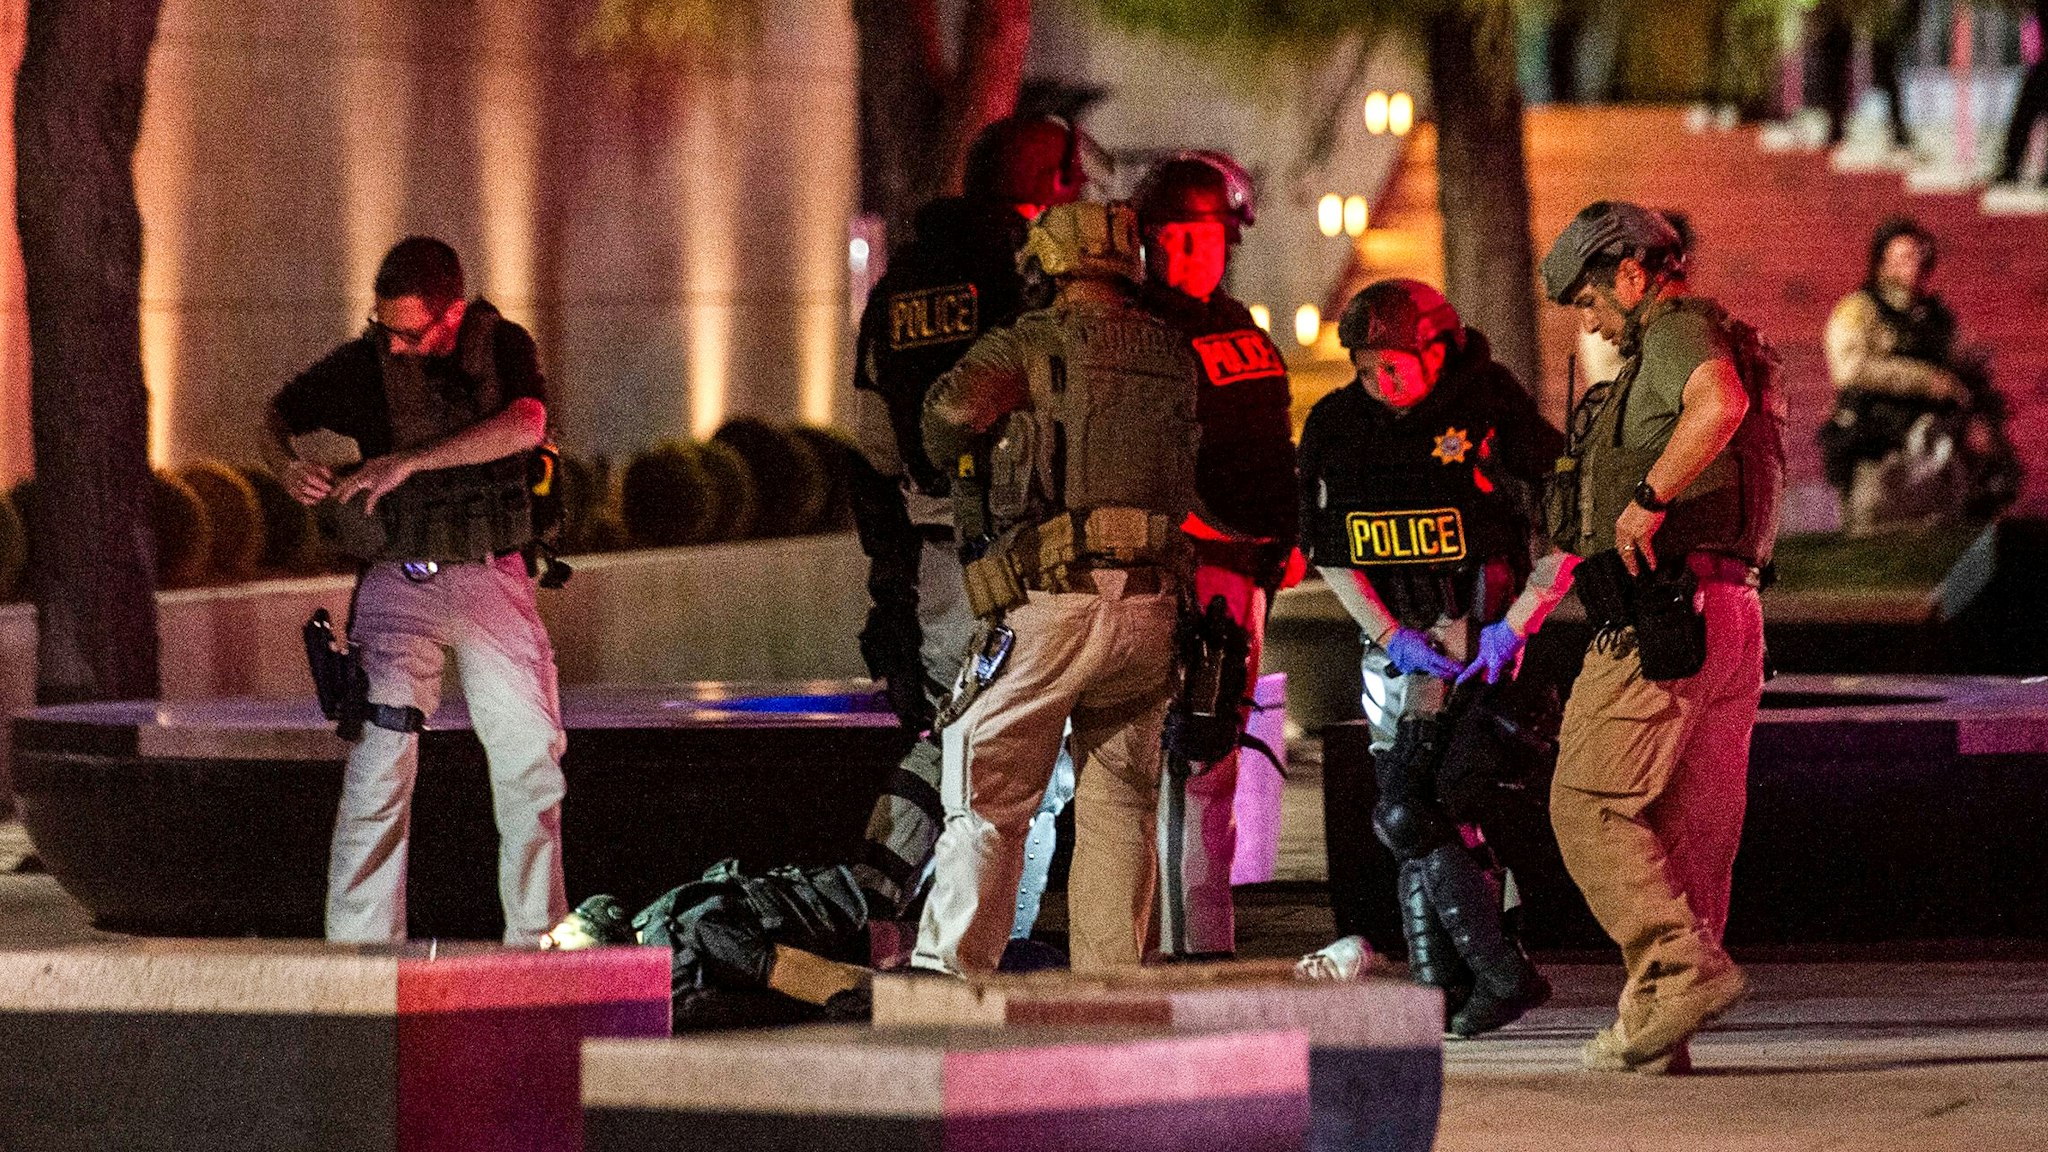 Police officers surround a person that was shot near the 300 block of South Las Vegas Boulevard, on June 1, 2020, in downtown Las Vegas, at the end of a rally in response to the recent death of George Floyd, an unarmed black man who died while in police custody. - Thousands of National Guard troops patrolled major US cities after five consecutive nights of protests over racism and police brutality that boiled over into arson and looting, sending shock waves through the country. The death Monday of an unarmed black man, George Floyd, at the hands of police in Minneapolis ignited this latest wave of outrage in the US over law enforcement's repeated use of lethal force against African Americans -- this one like others before captured on cellphone video.